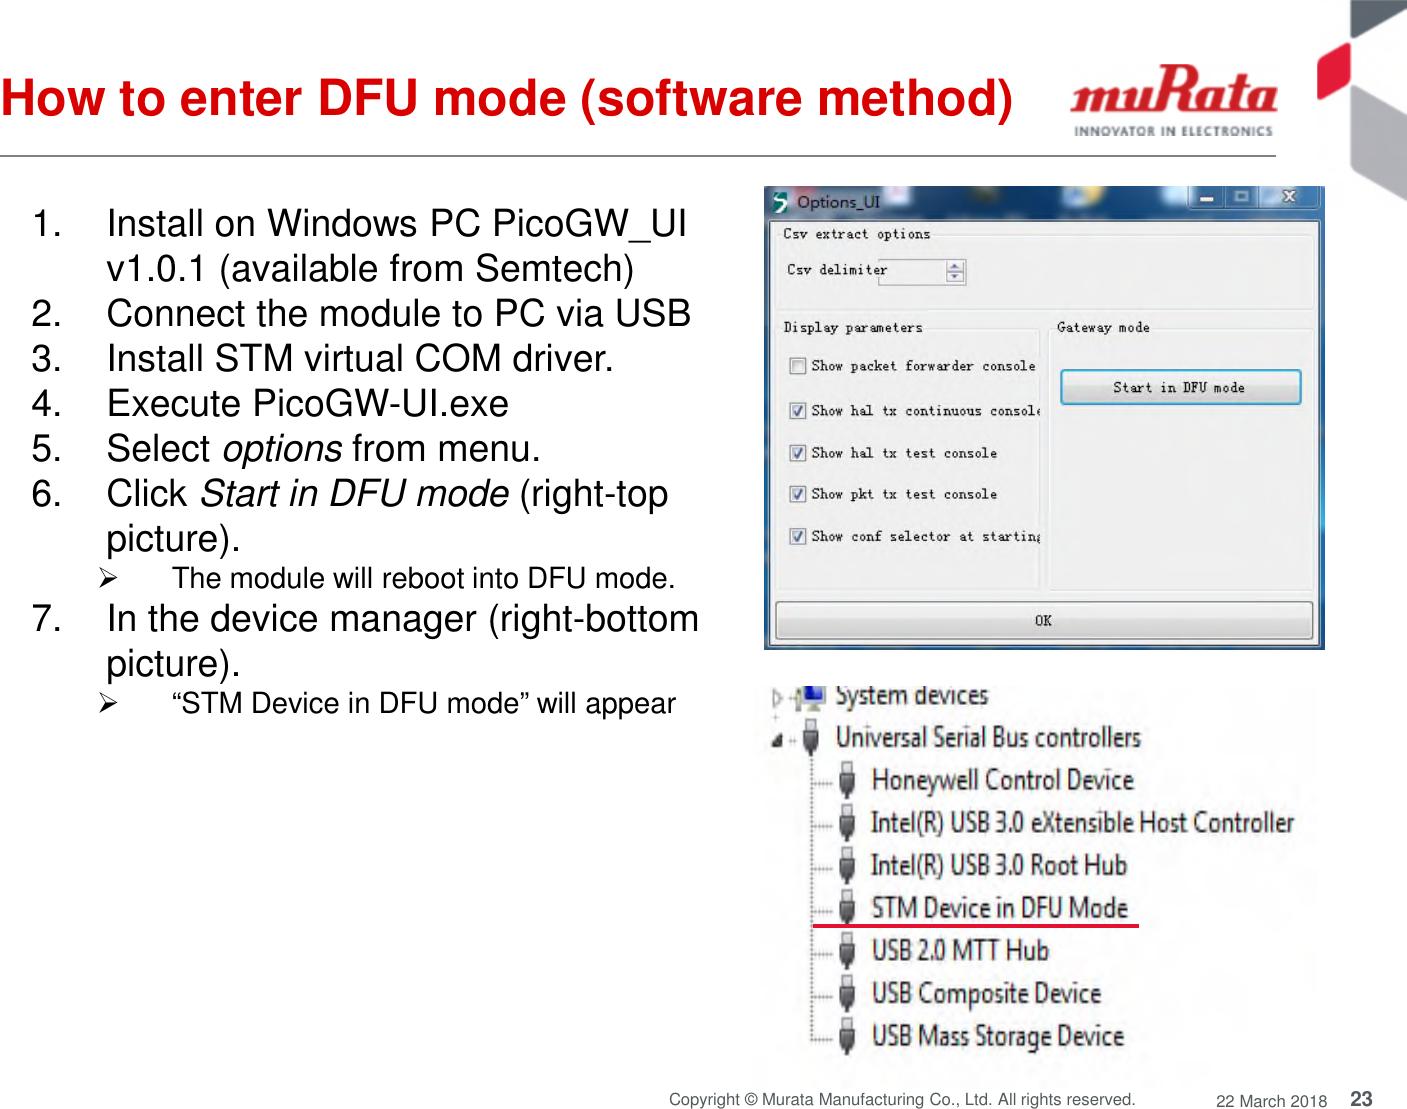 23Copyright © Murata Manufacturing Co., Ltd. All rights reserved. 22 March 2018How to enter DFU mode (software method)1. Install on Windows PC PicoGW_UIv1.0.1 (available from Semtech)2. Connect the module to PC via USB3. Install STM virtual COM driver.4. Execute PicoGW-UI.exe5. Select options from menu.6. Click Start in DFU mode (right-toppicture).The module will reboot into DFU mode.7. In the device manager (right-bottompicture).“STM Device in DFU mode” will appear